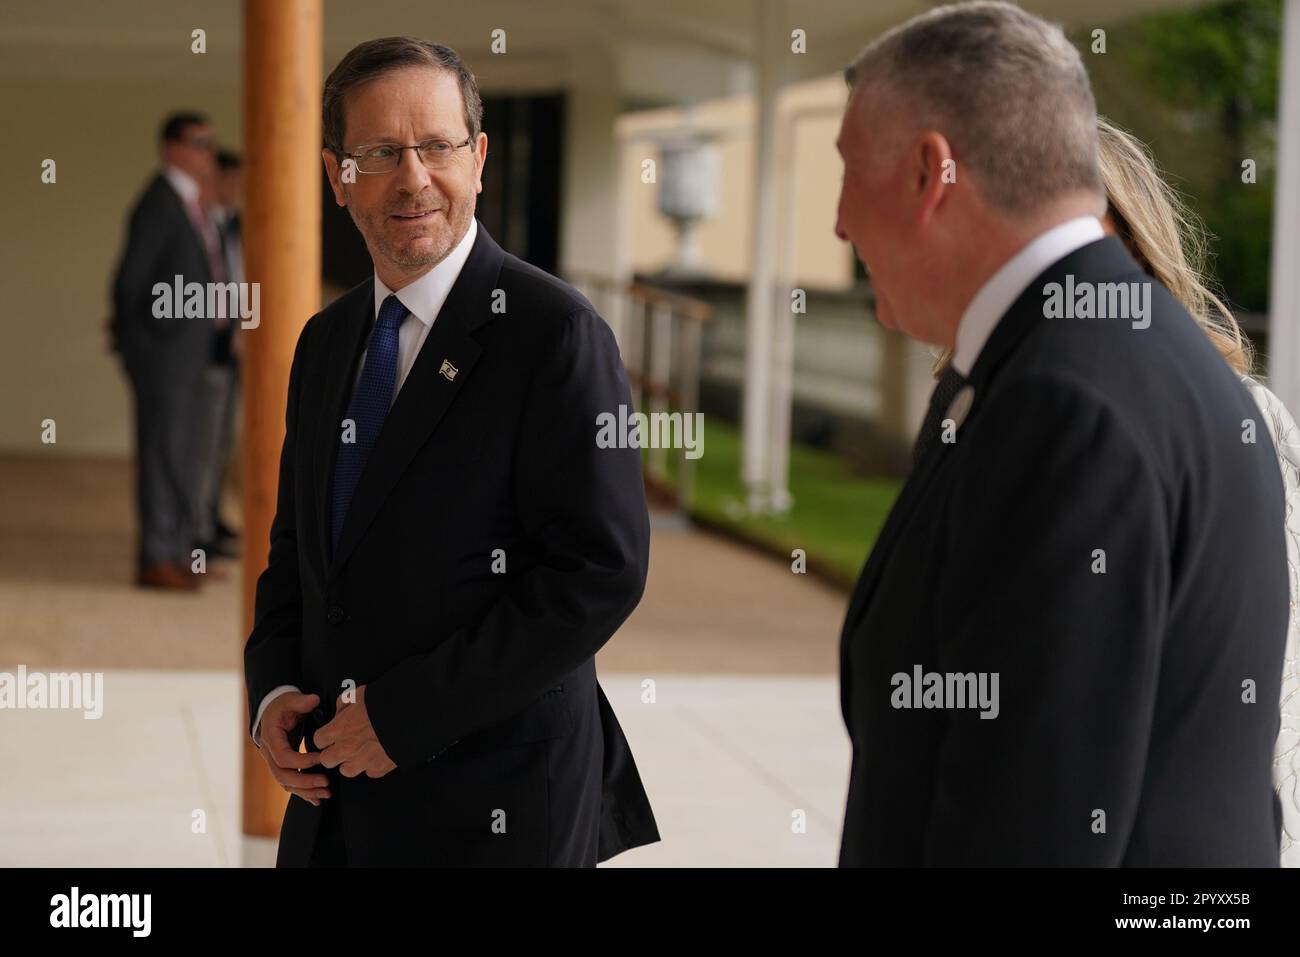 The President of Israel, Isaac Herzog (left), arrives, with his wife Michal (hidden), for a reception at Buckingham Palace in London, hosted by King Charles III for overseas guests attending his coronation. Picture date: Friday May 5, 2023. Stock Photo